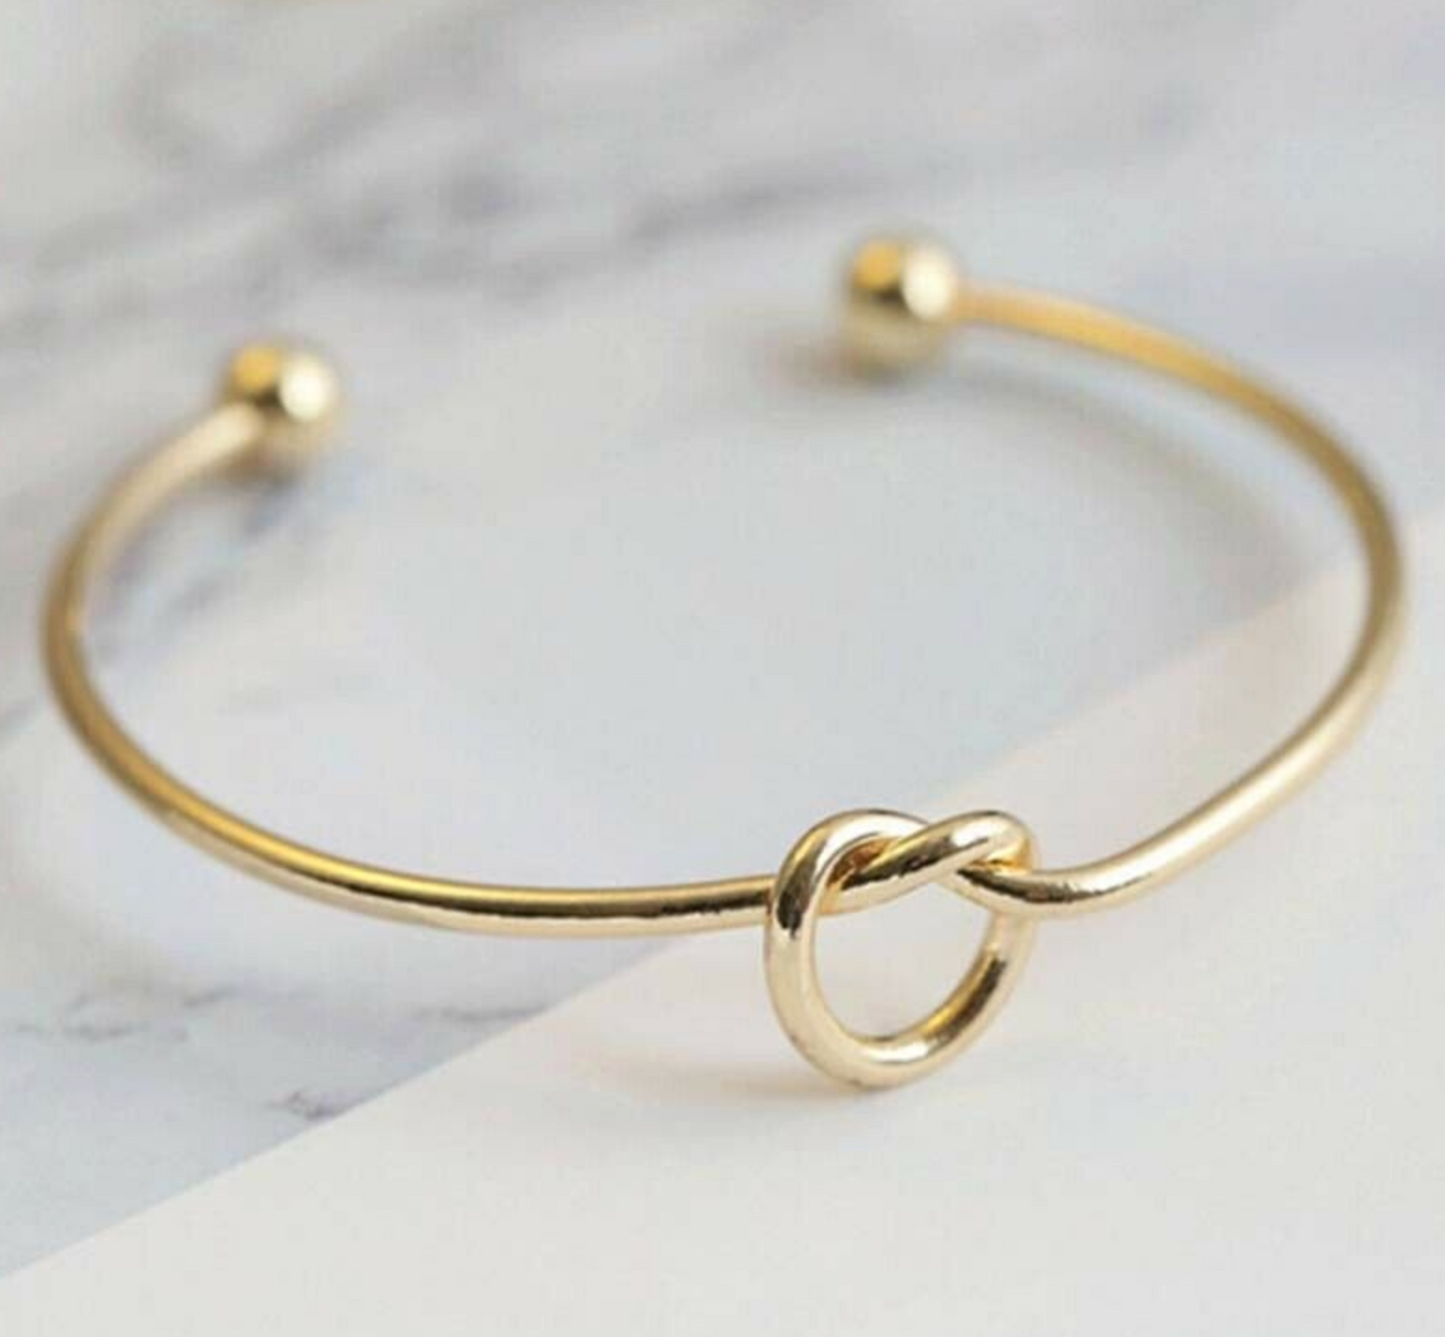 Can't Say "I Do" Without You! Knot Bangles